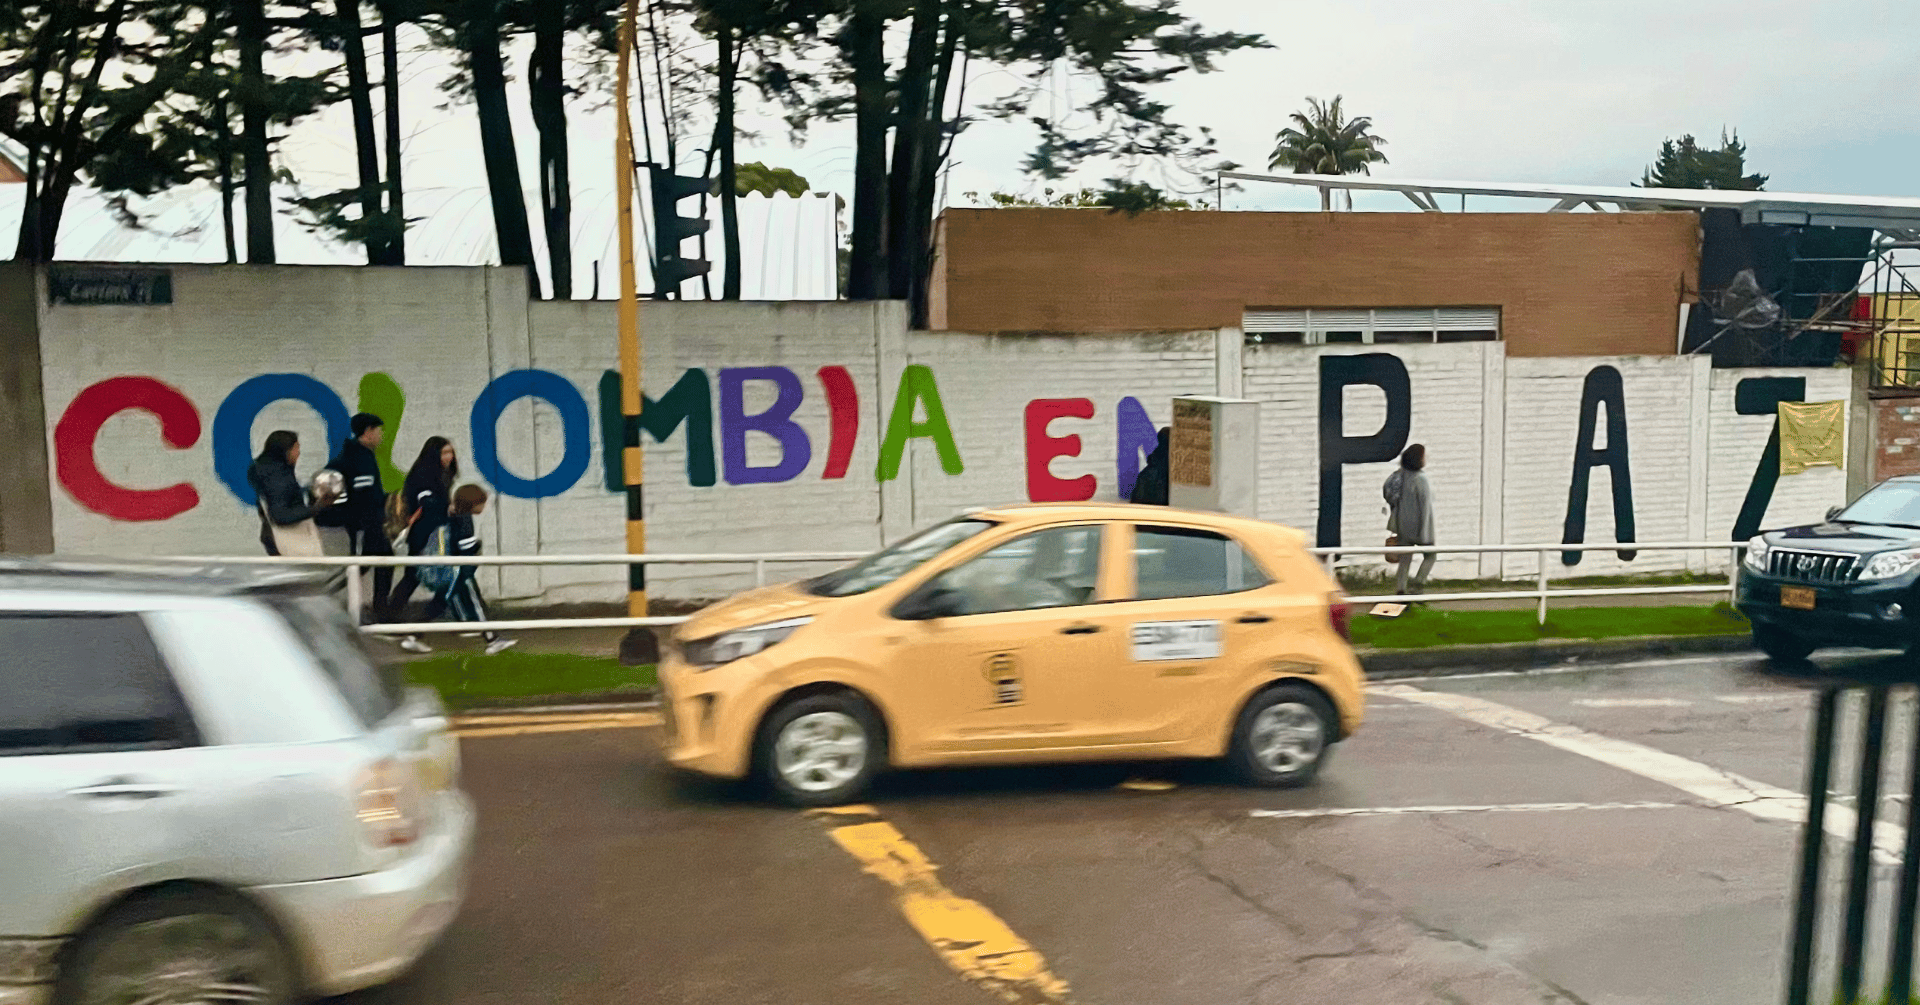 Picture from an urban street in Colombia, where graffiti says "Colombia en paz"